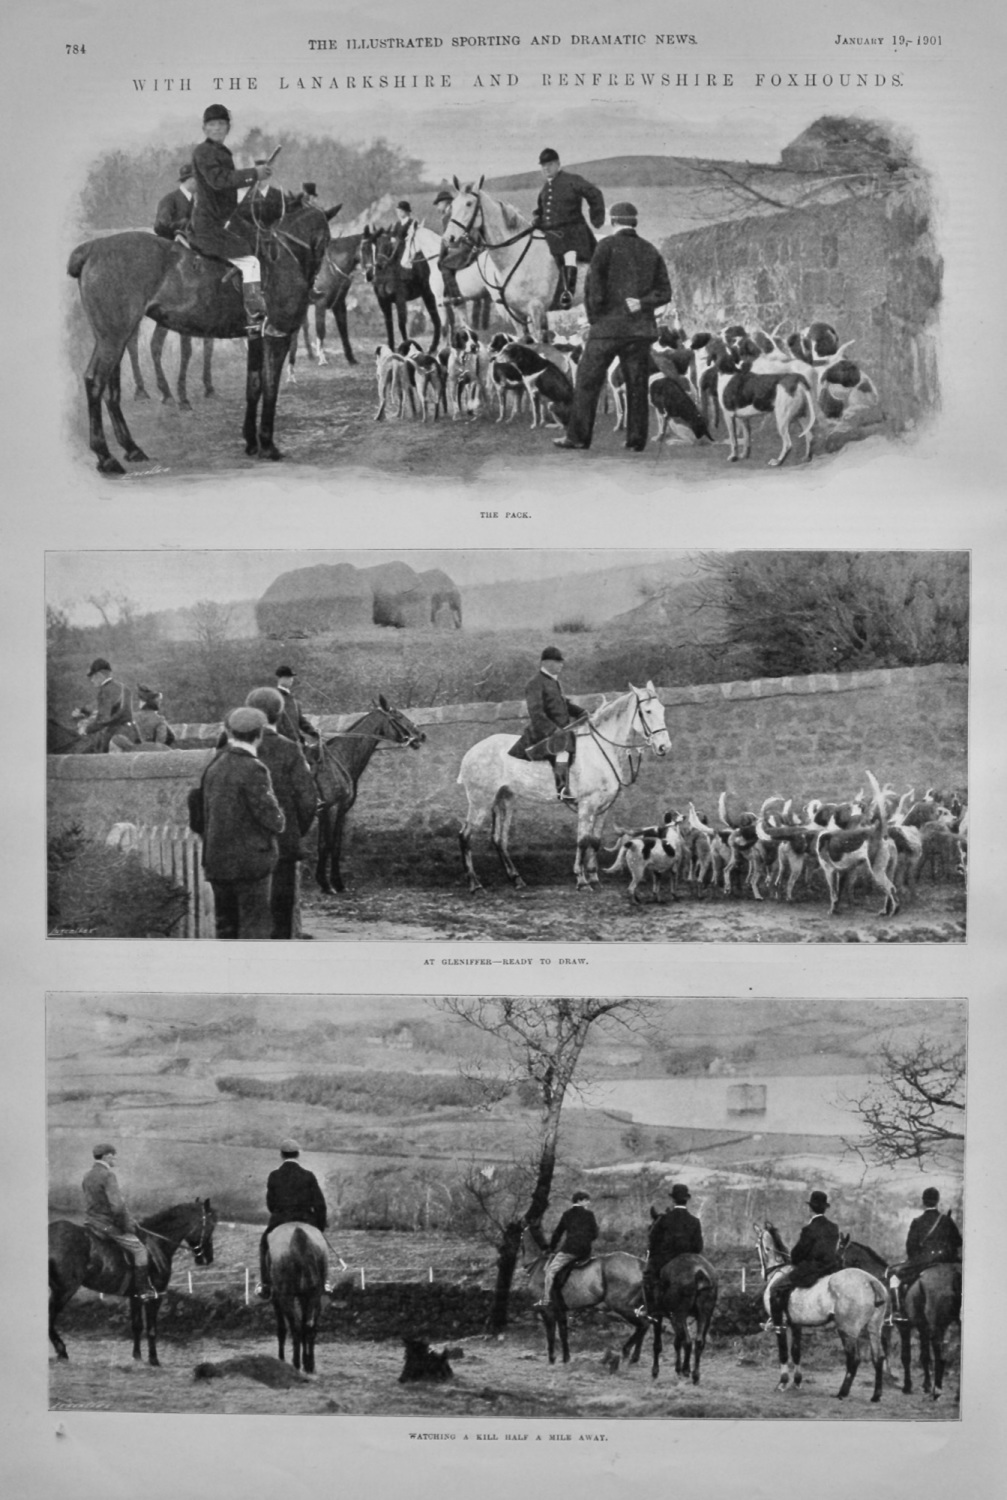 With The Lanarkshire and Renfrewshire Foxhounds.  1901.